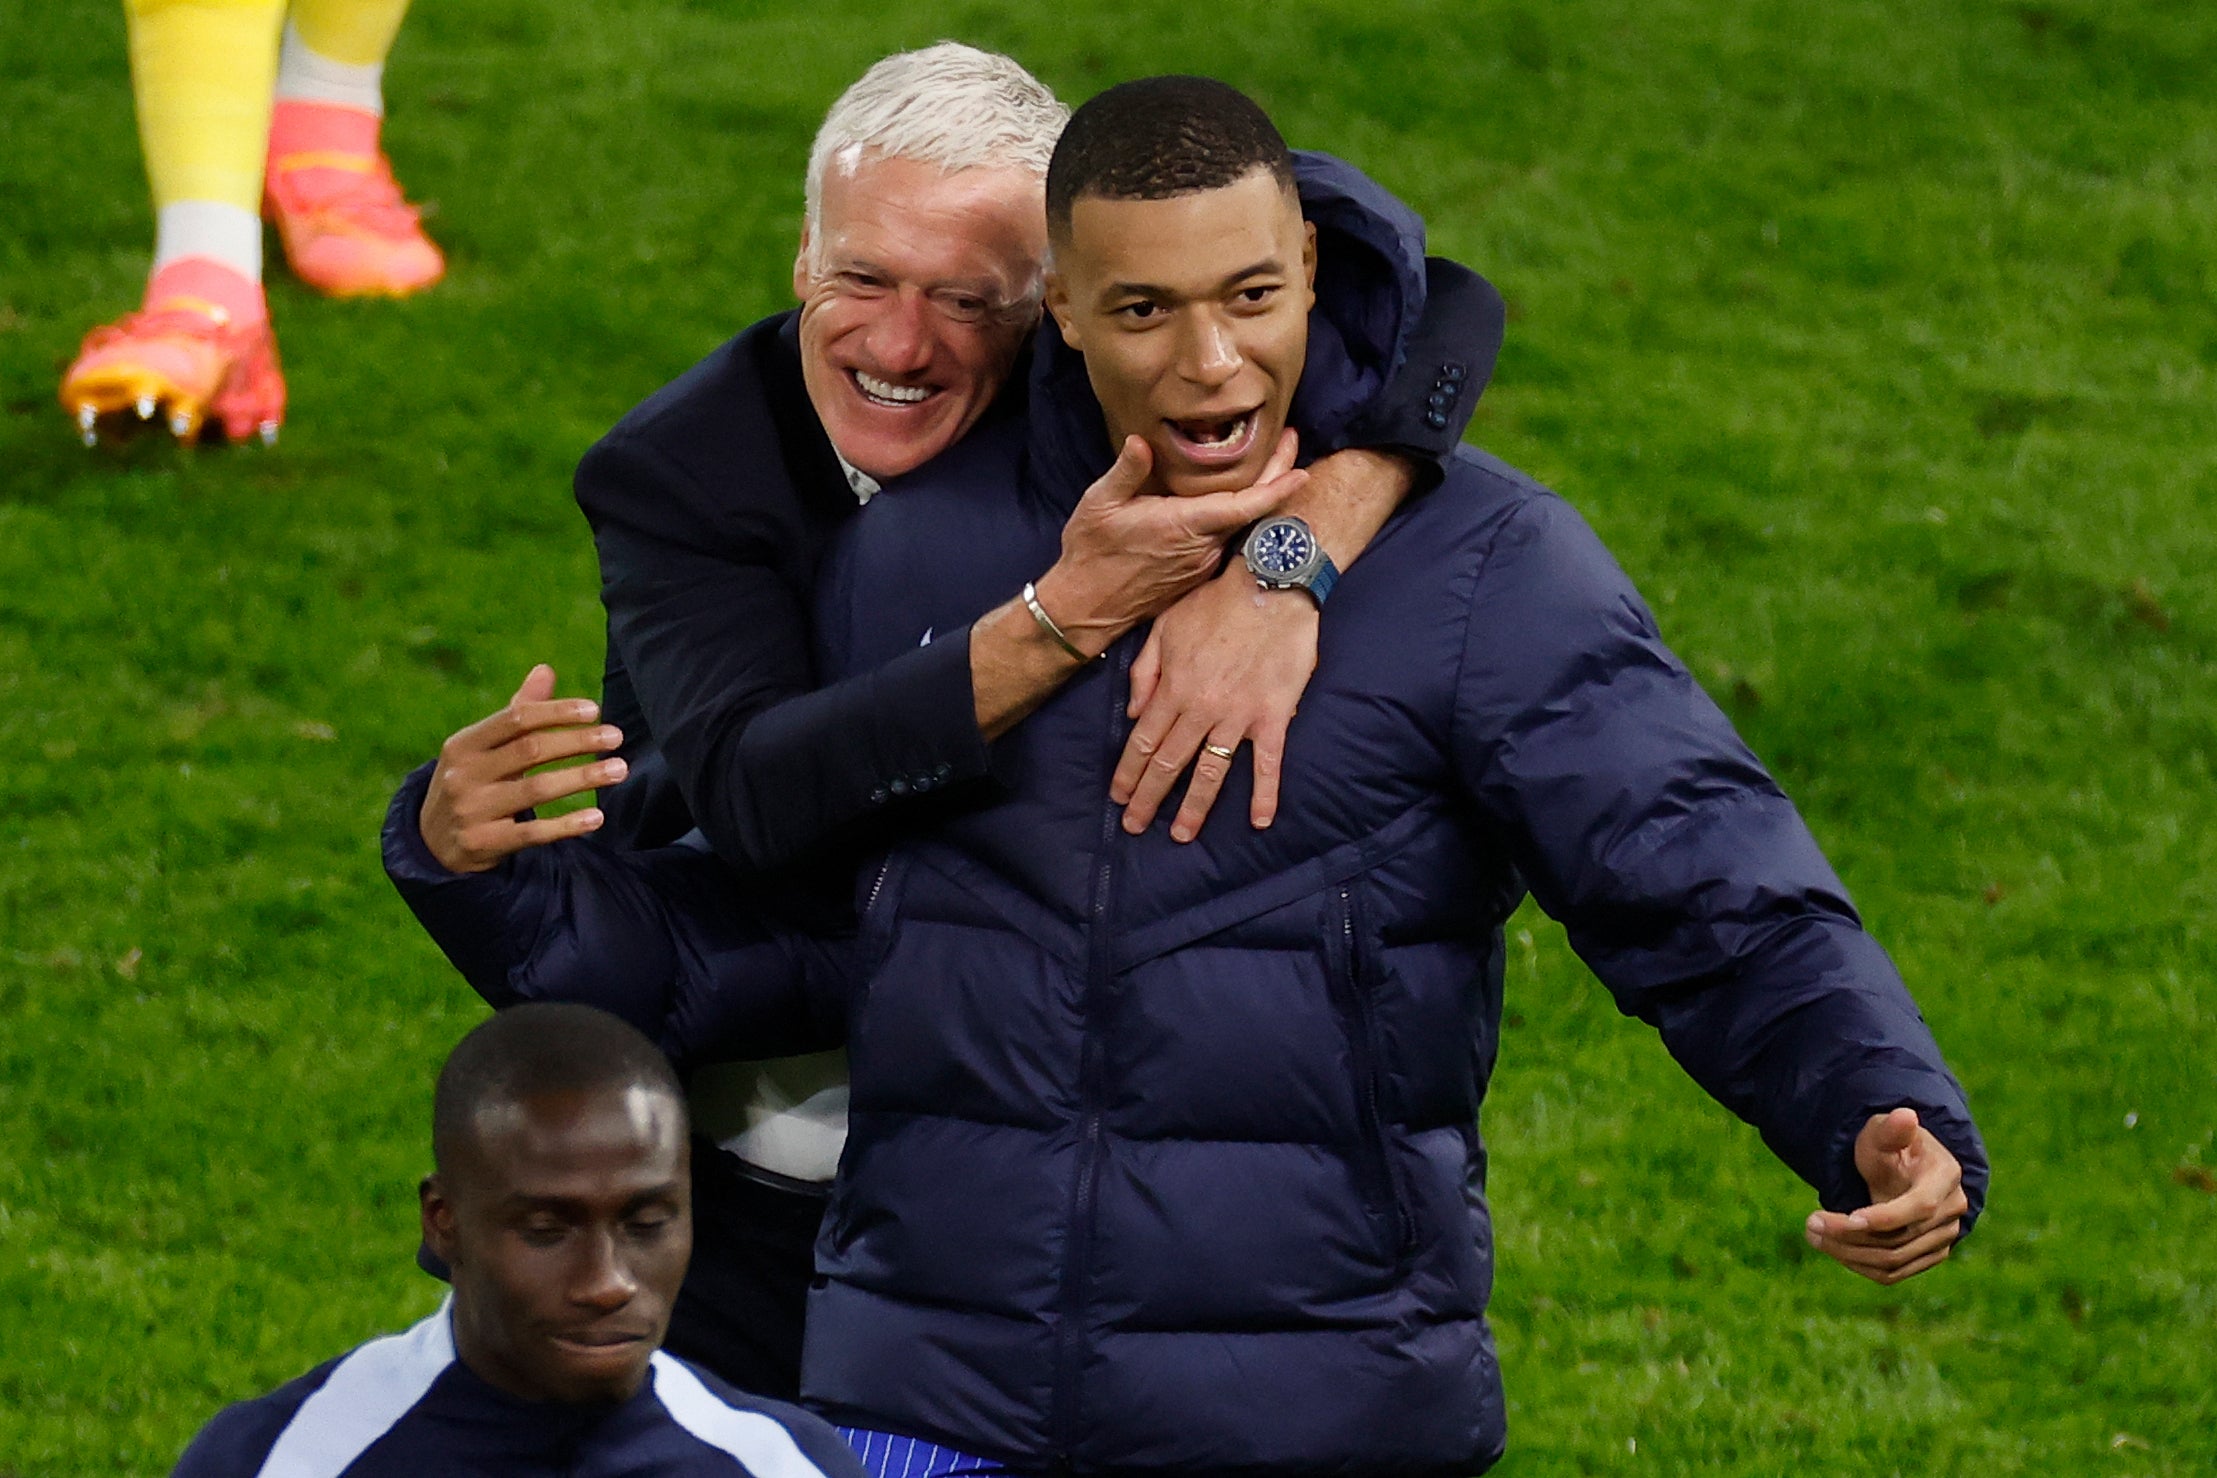 France manager Didier Deschamps has come to define ‘tournament ball’ even with a star such as Kylian Mbappe in his side